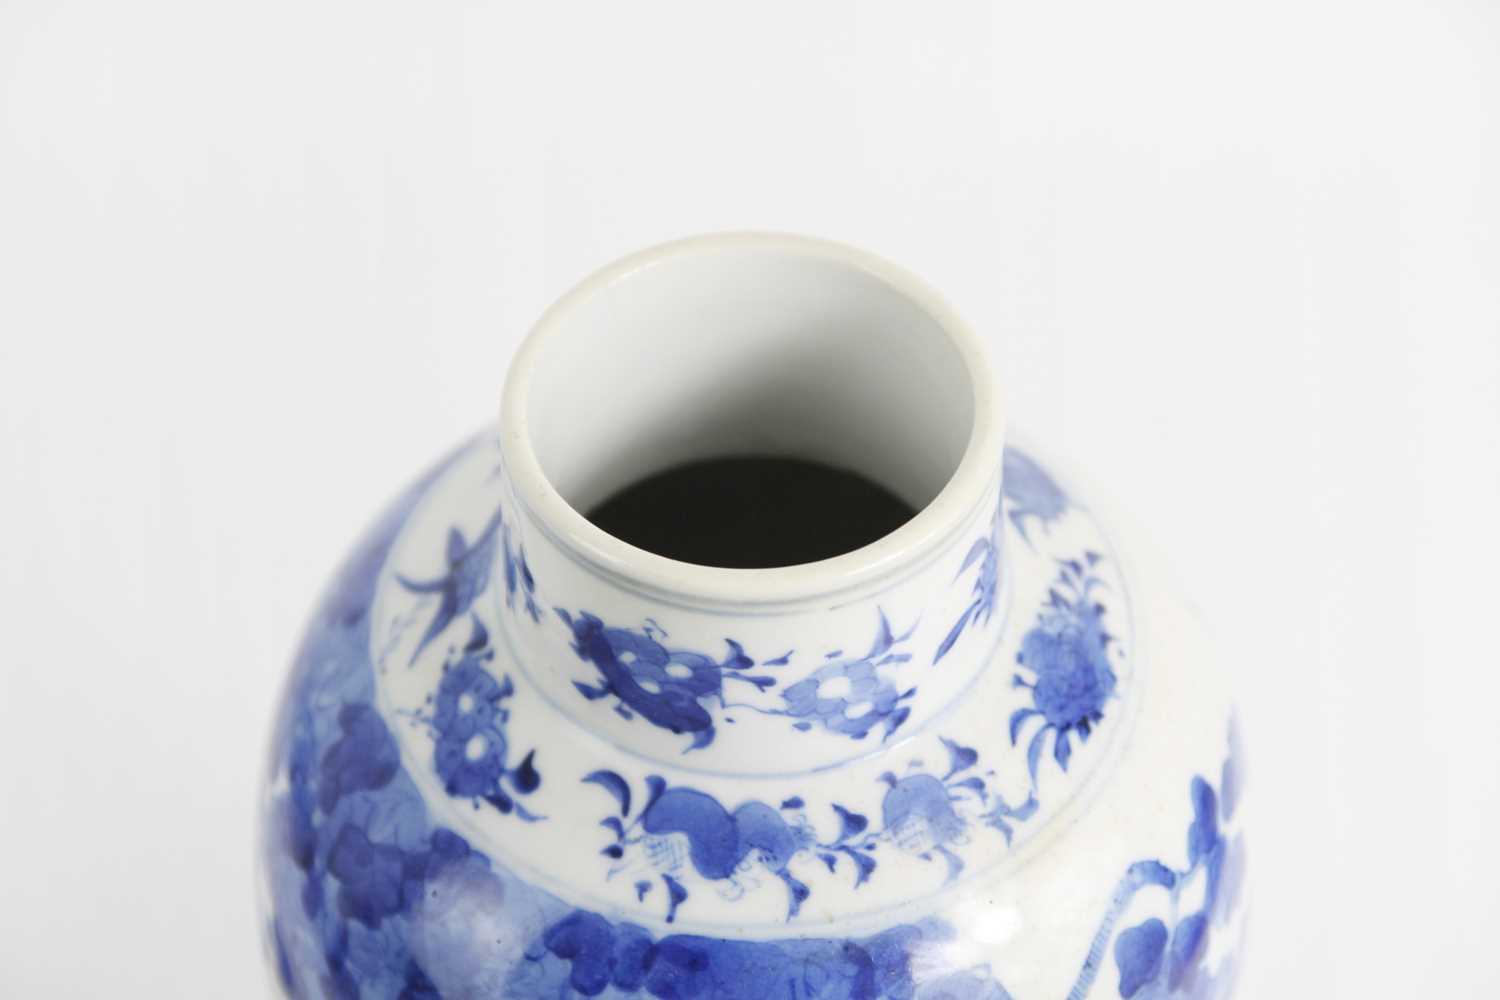 A Chinese blue and white porcelain vase and cover, Qing Dynasty, late 19th century. - Image 11 of 21